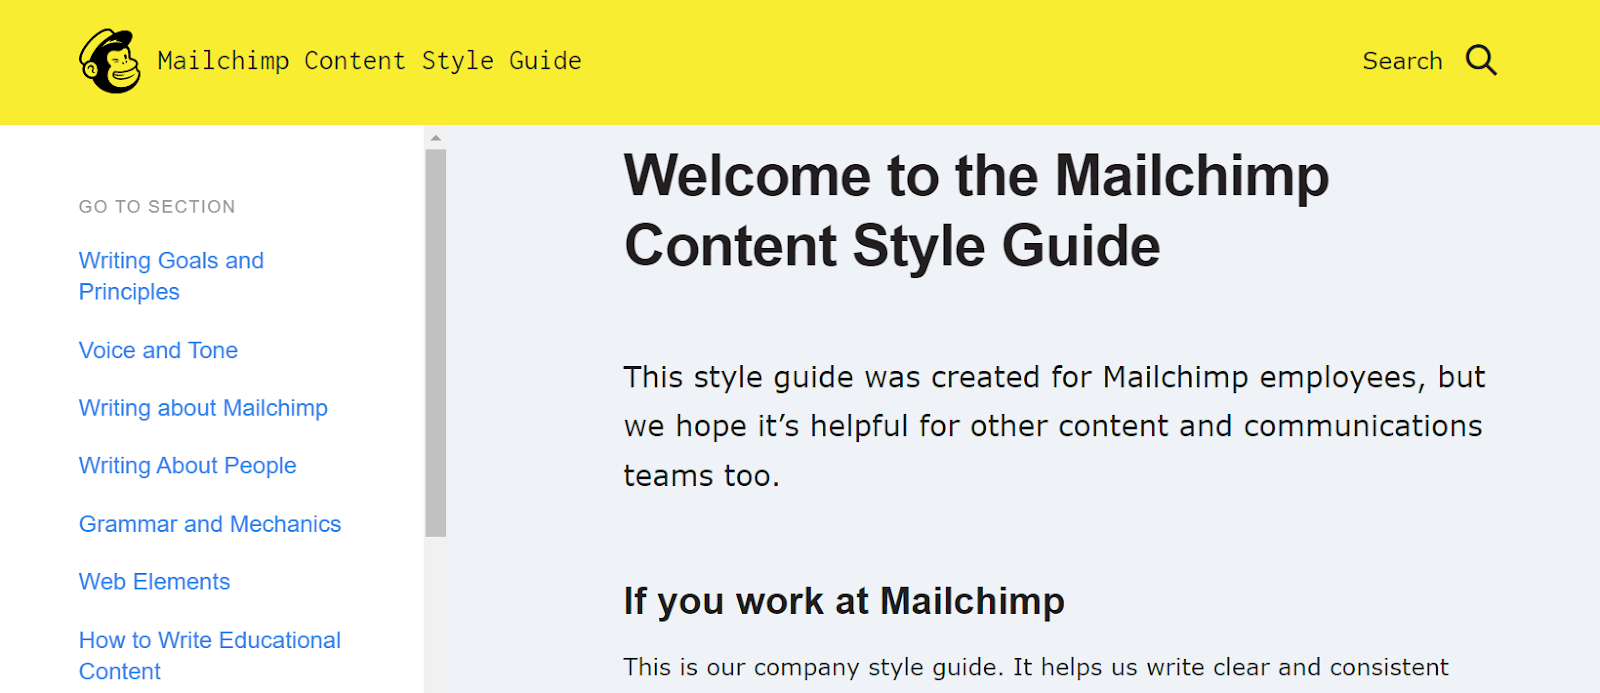 Mailchimp Content Style Guide